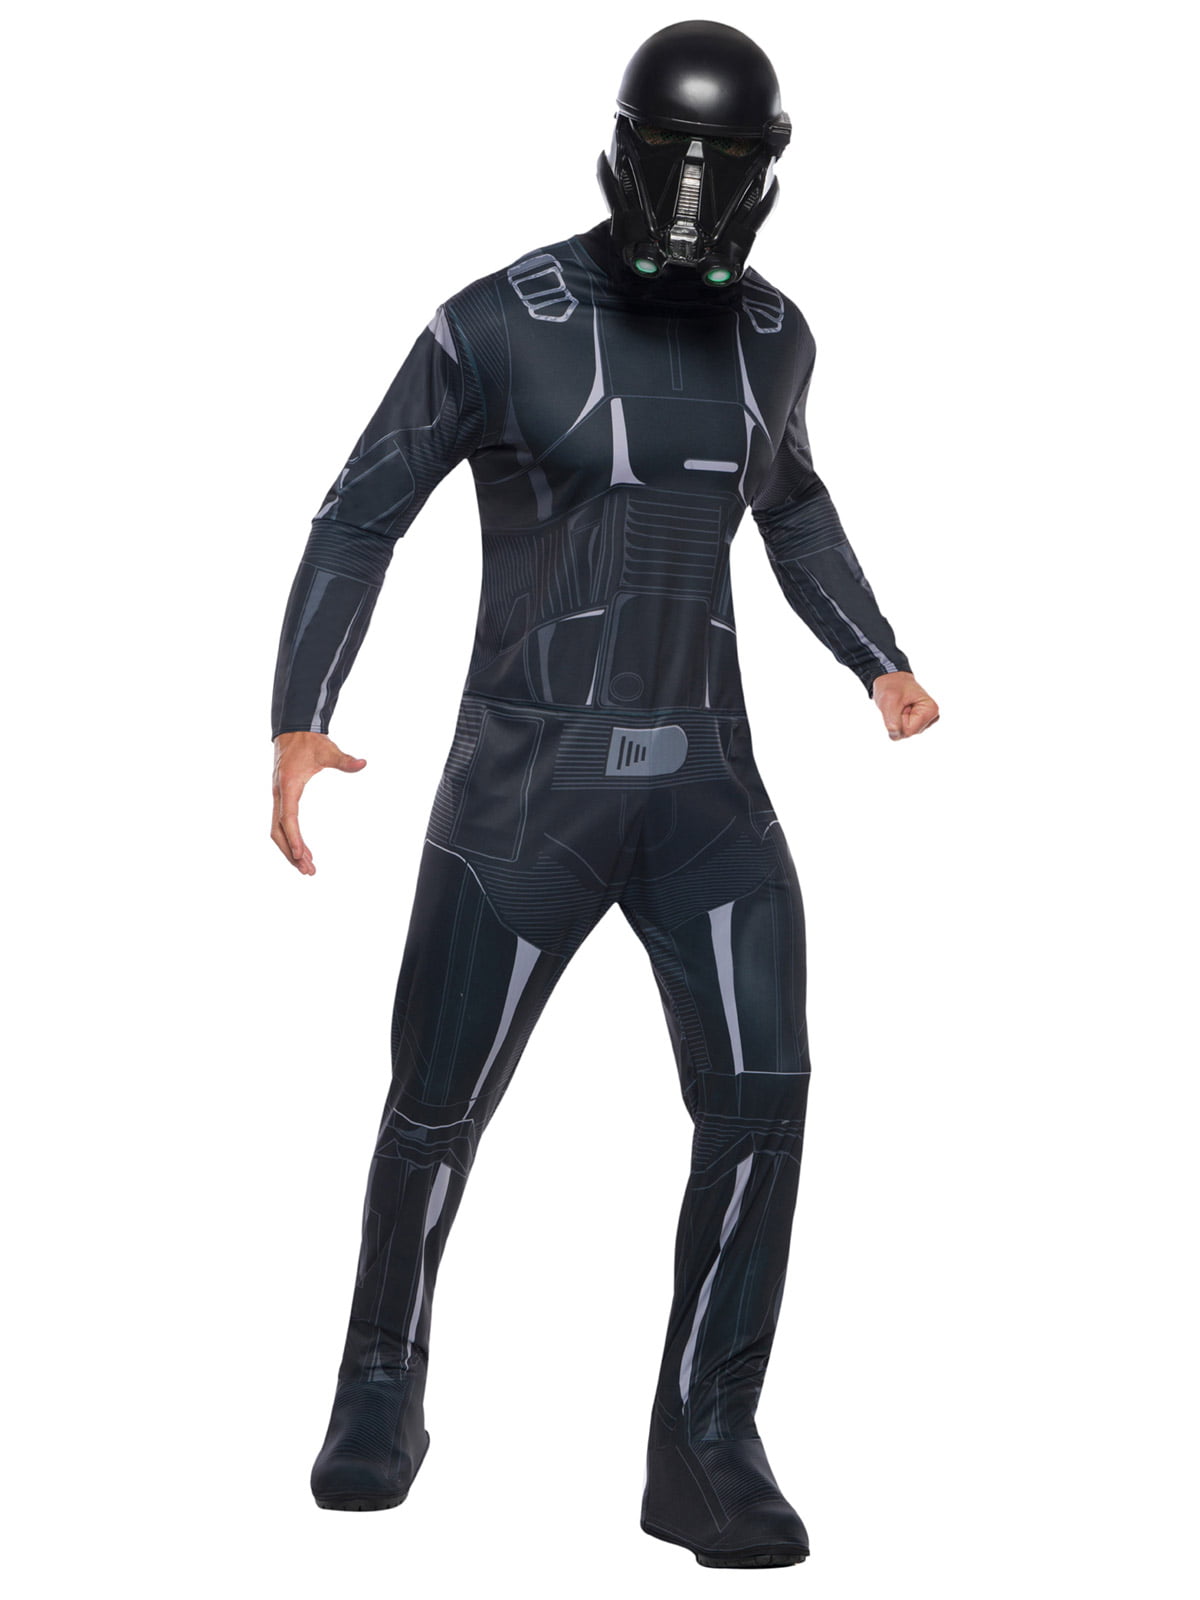 Featured image for “Death Trooper Rogue One Costume, Adult”